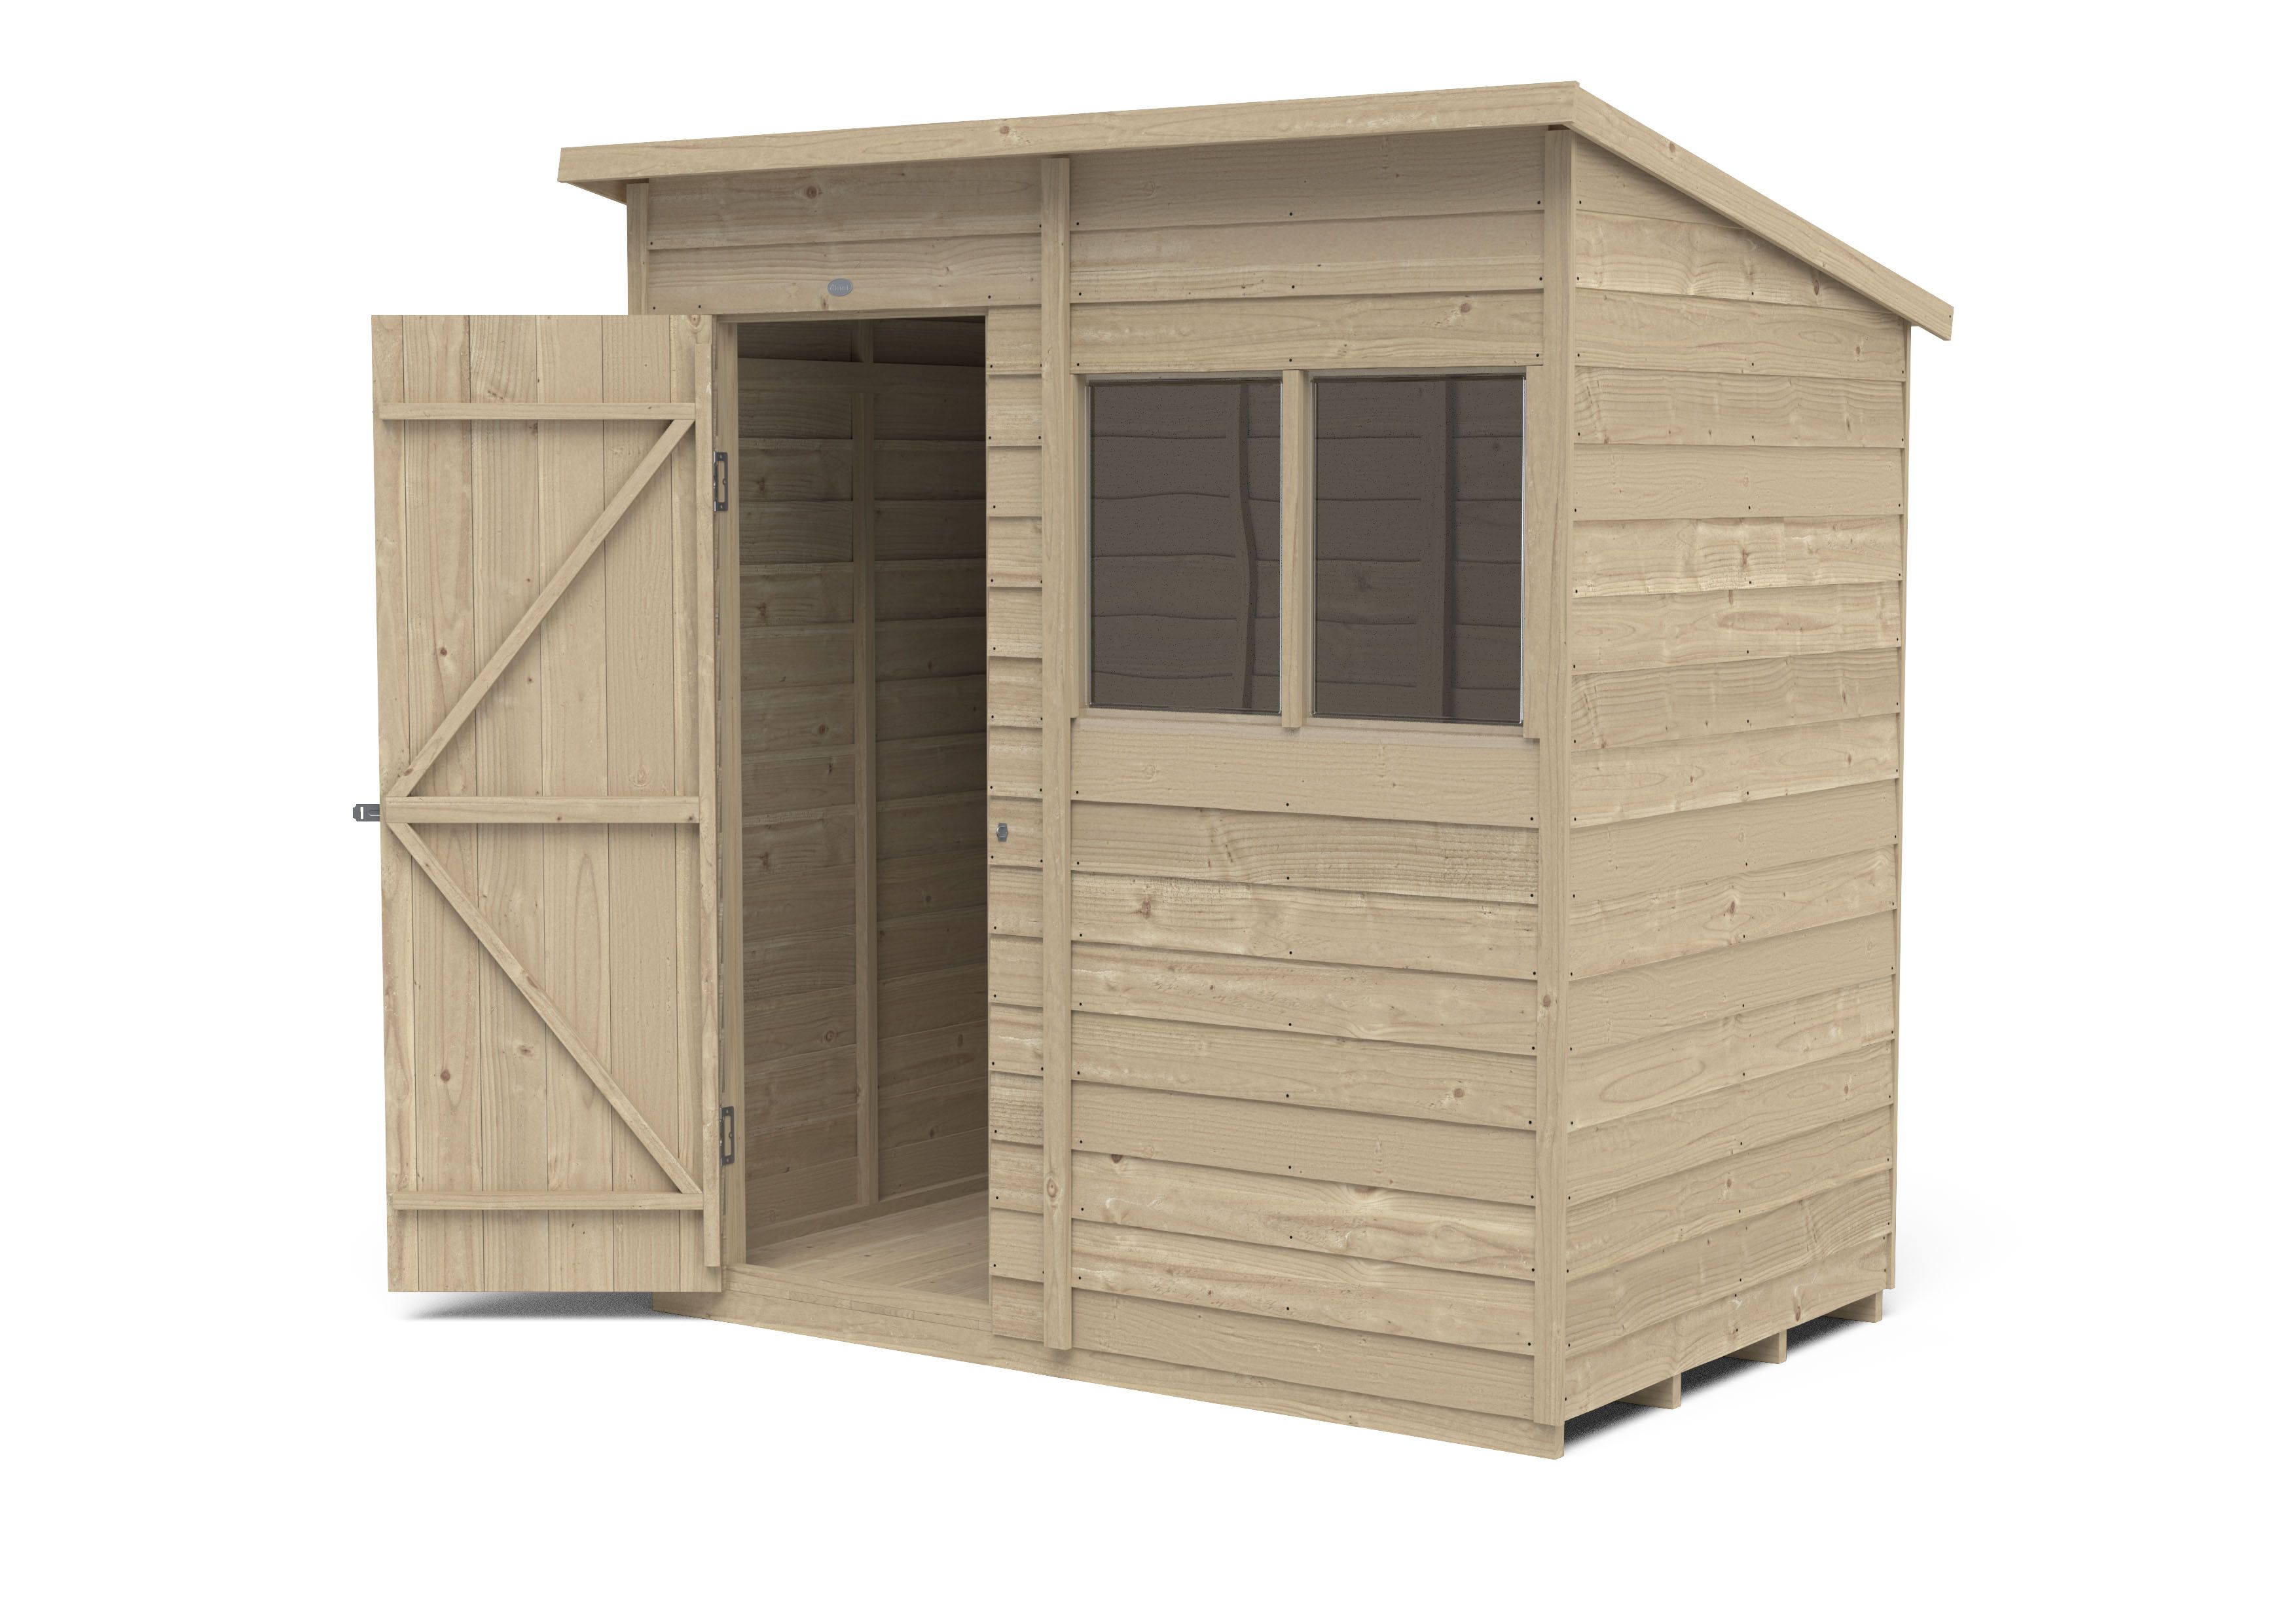 Forest Garden Overlap 6x4 ft Pent Wooden Pressure treated Shed with floor & 2 windows - Assembly service included